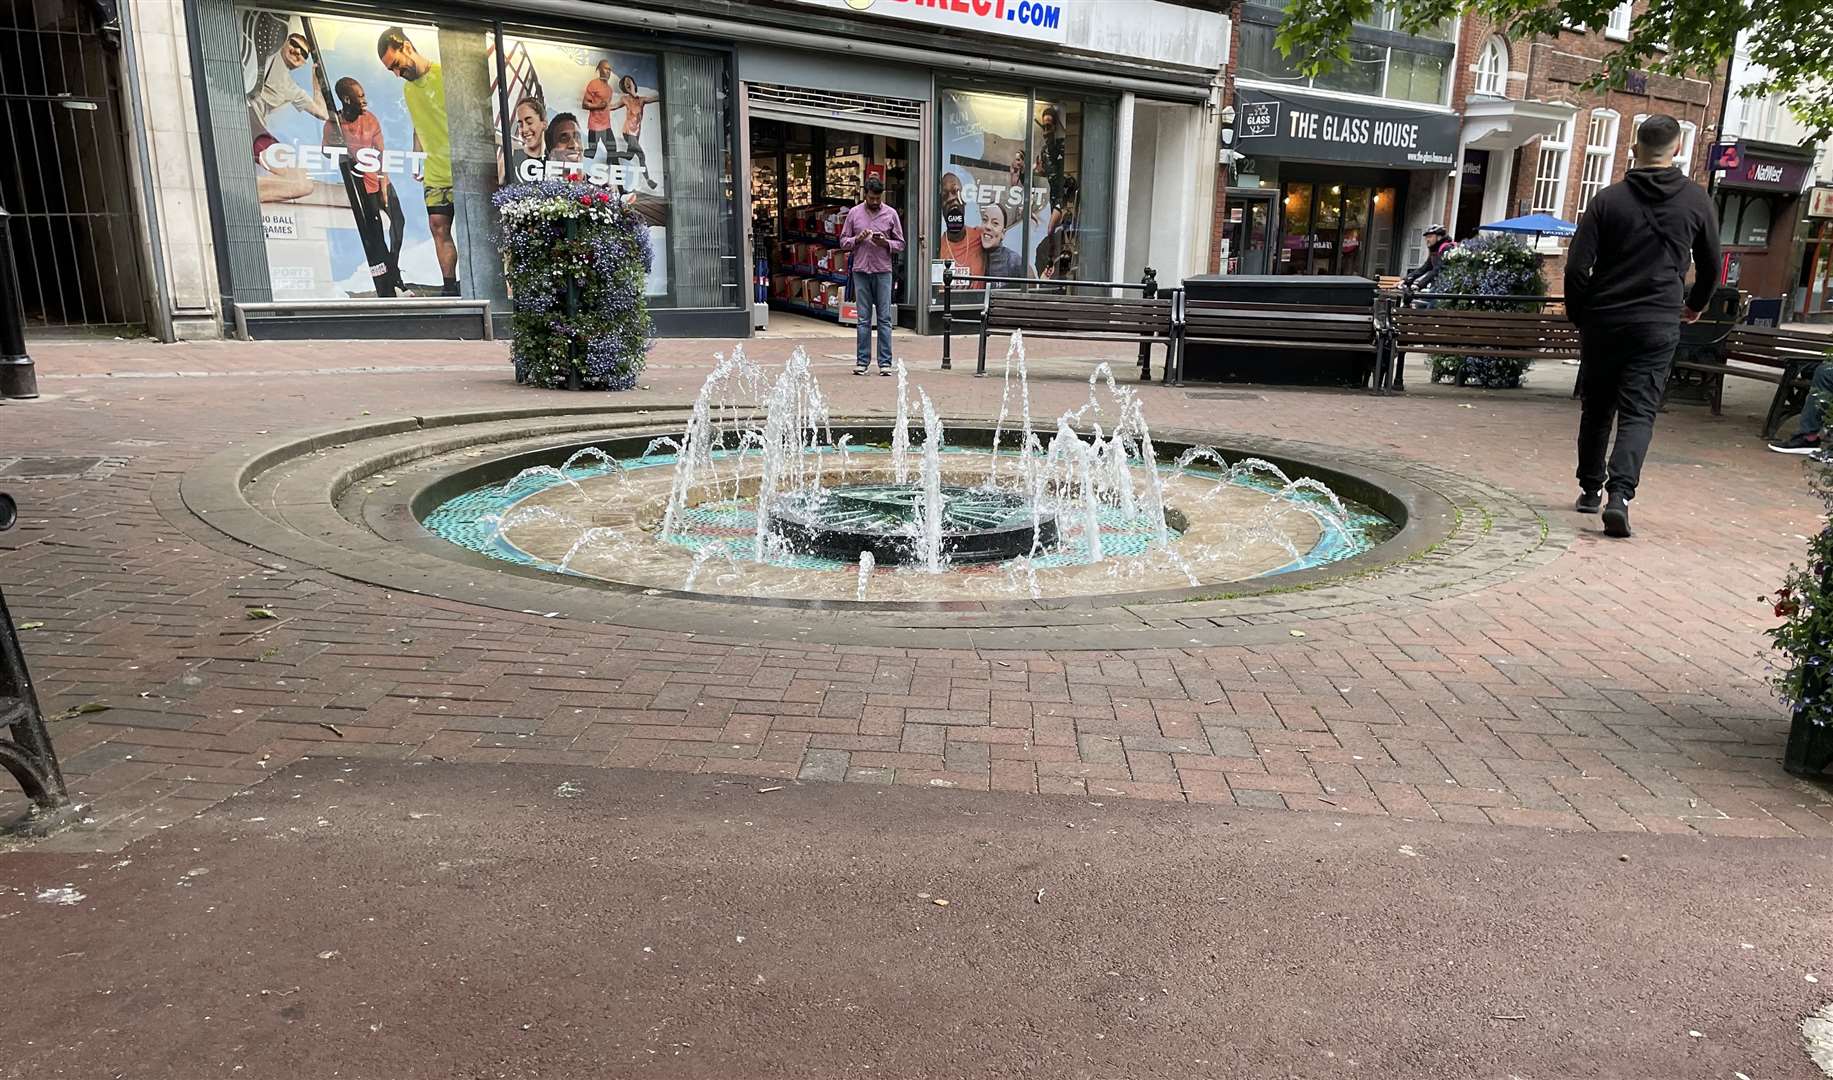 The assault took place by the fountain in the High Street